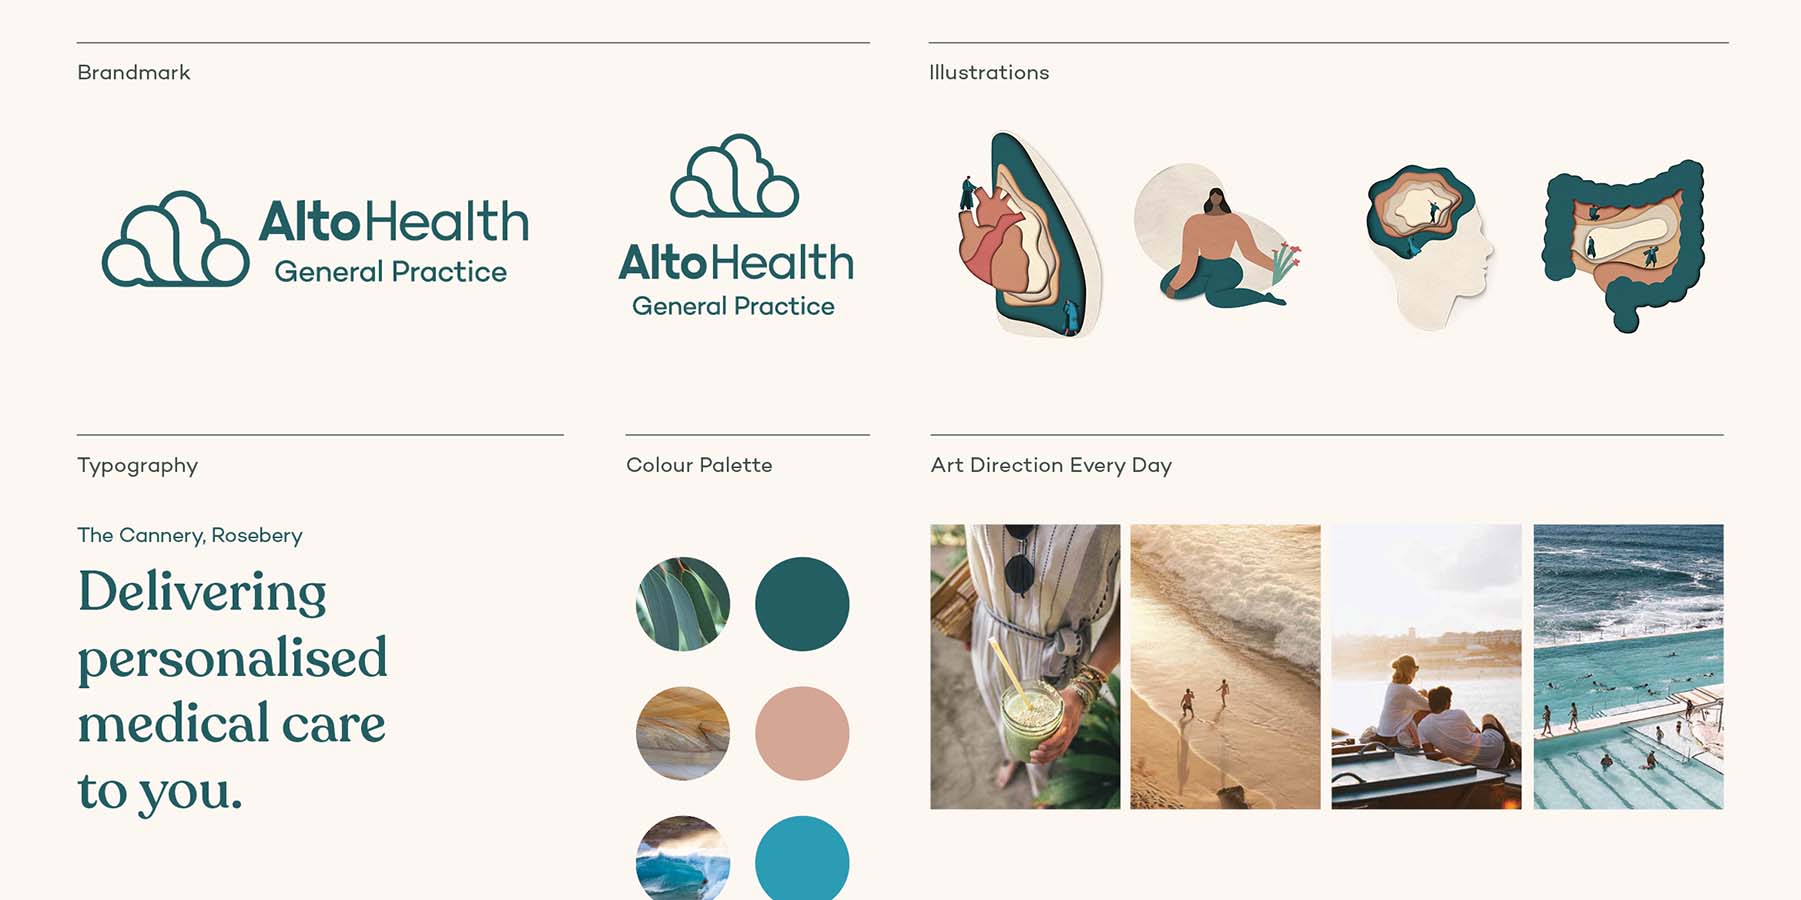 Alto Health branding - snapshop of brand assets such as logo, colours, illustrations, typography and art direction/photos